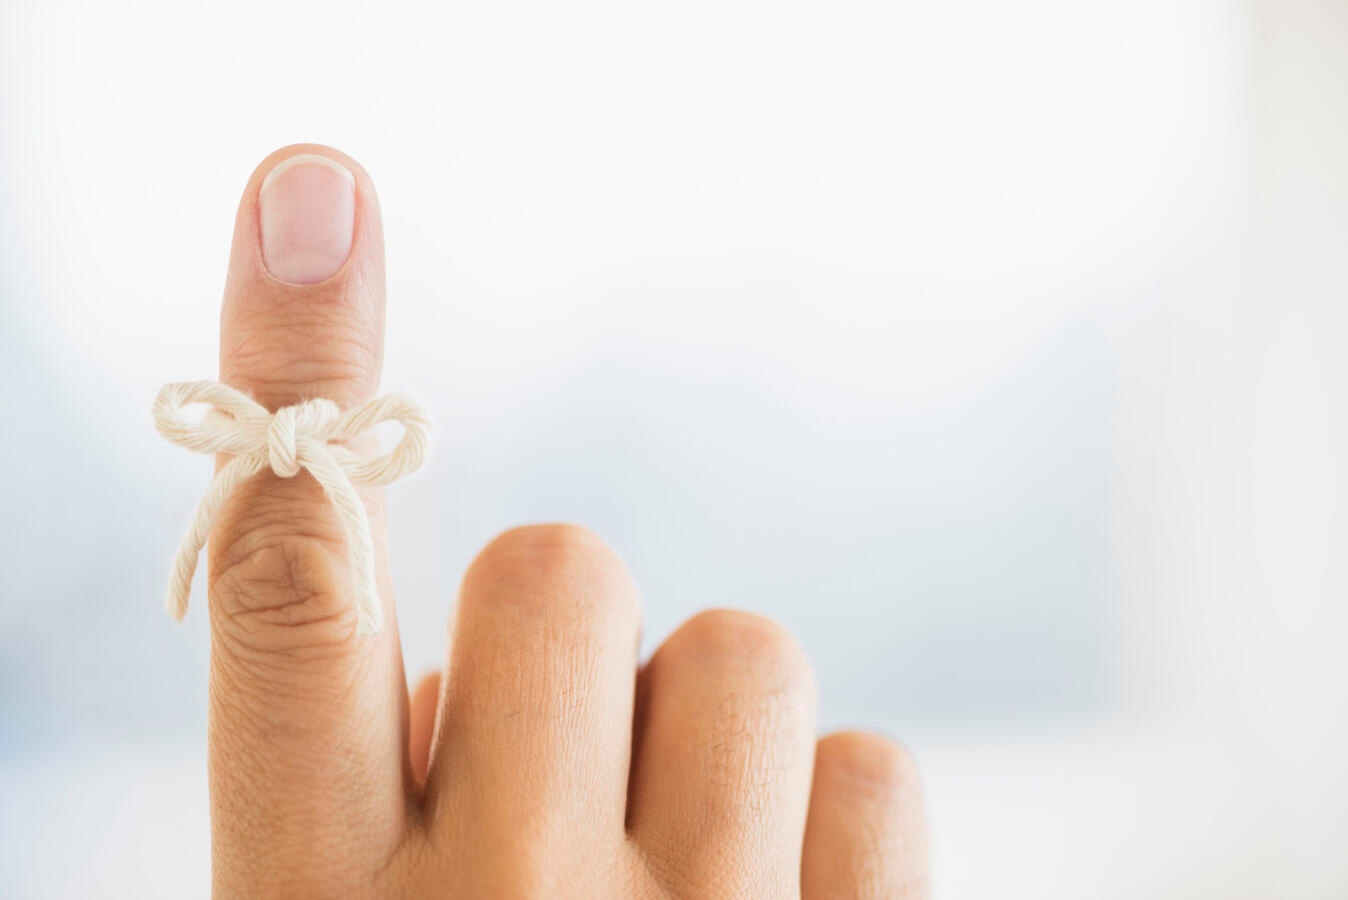 Hand with reminder bow on finger